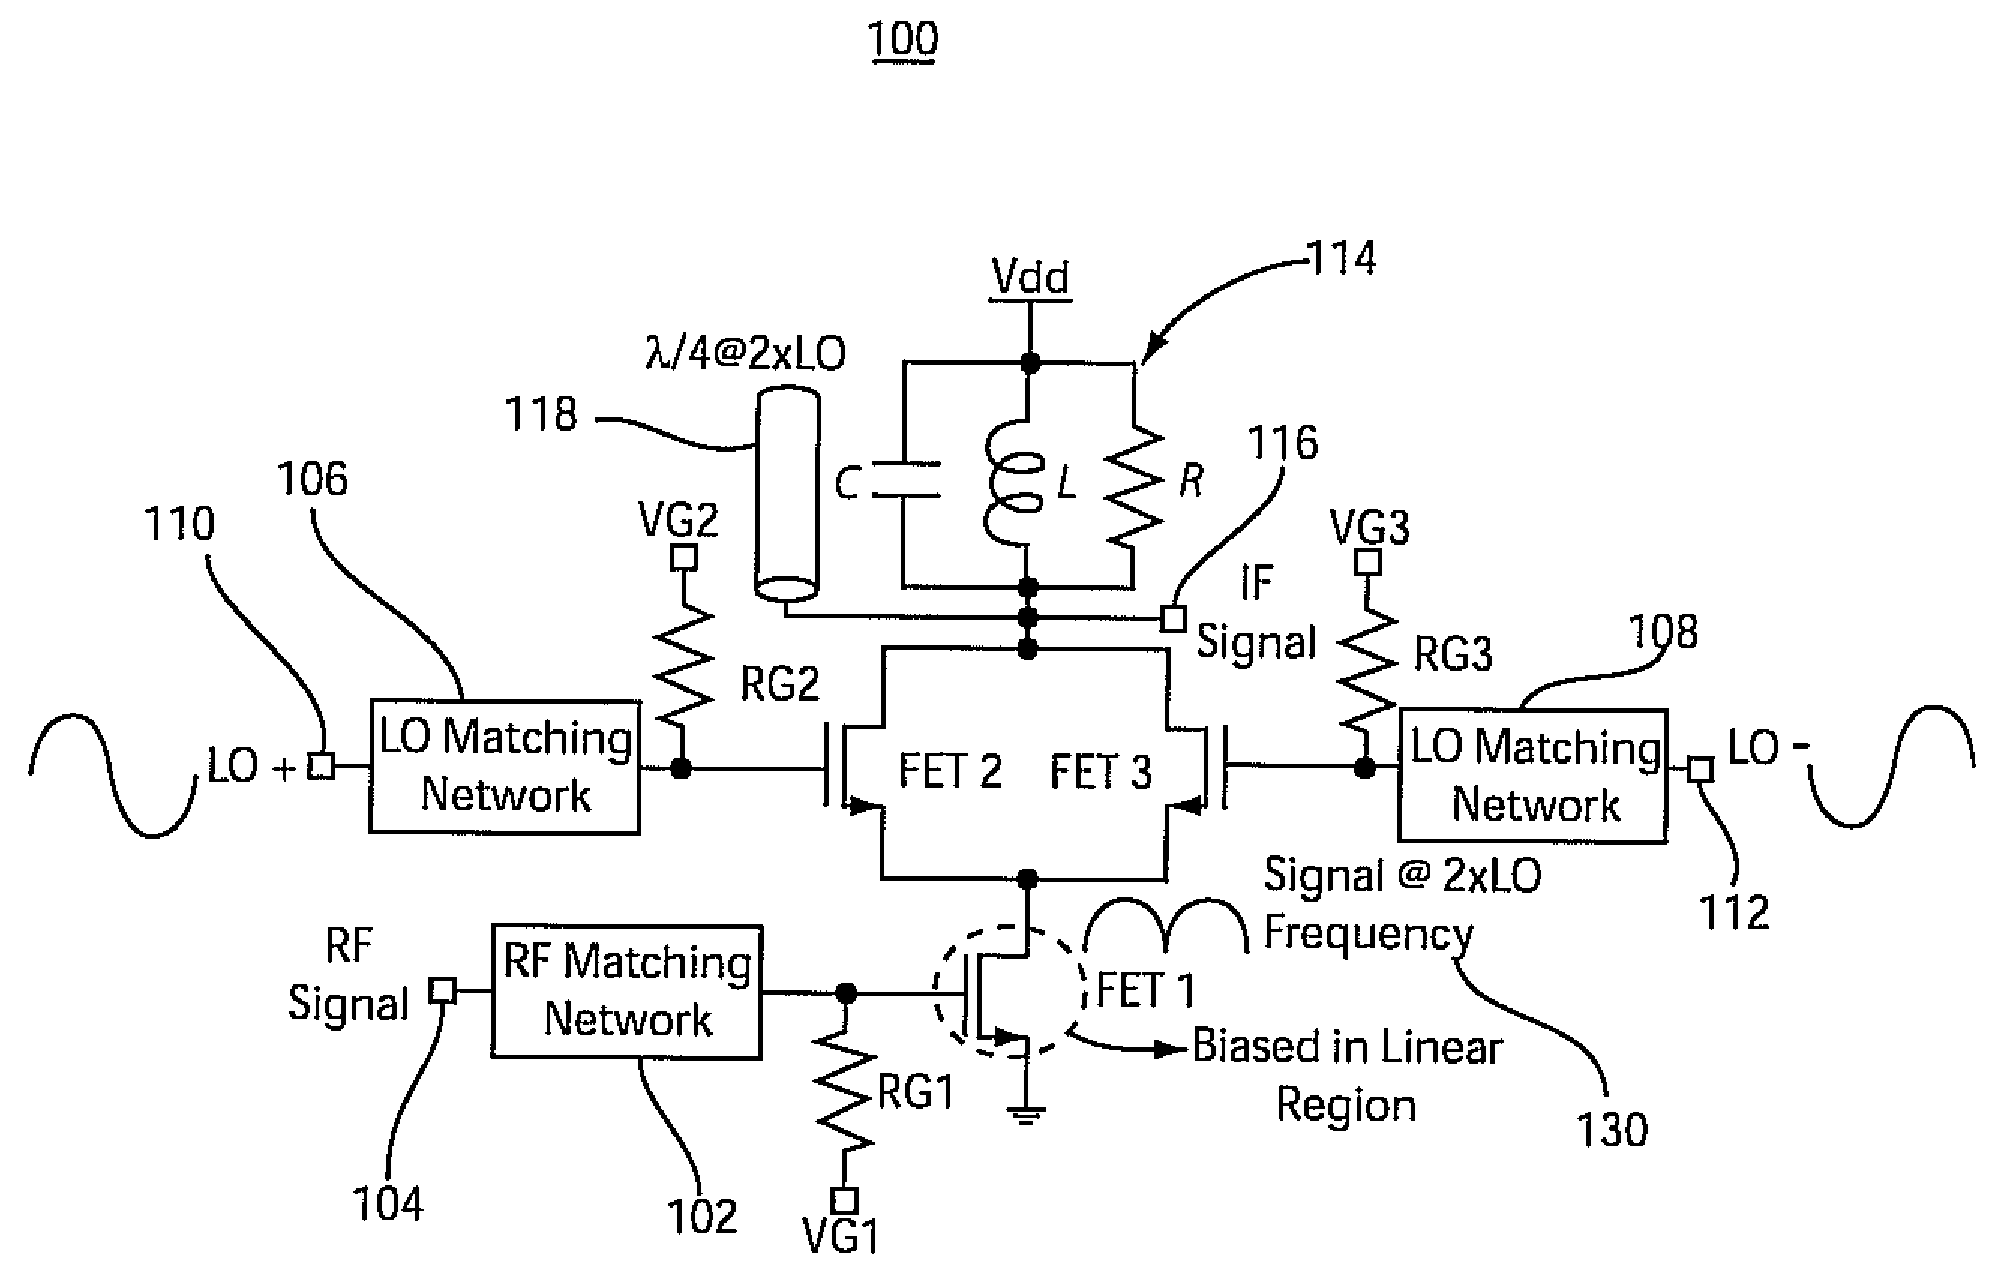 Drain-pumped sub-harmonic mixer for millimeter wave applications